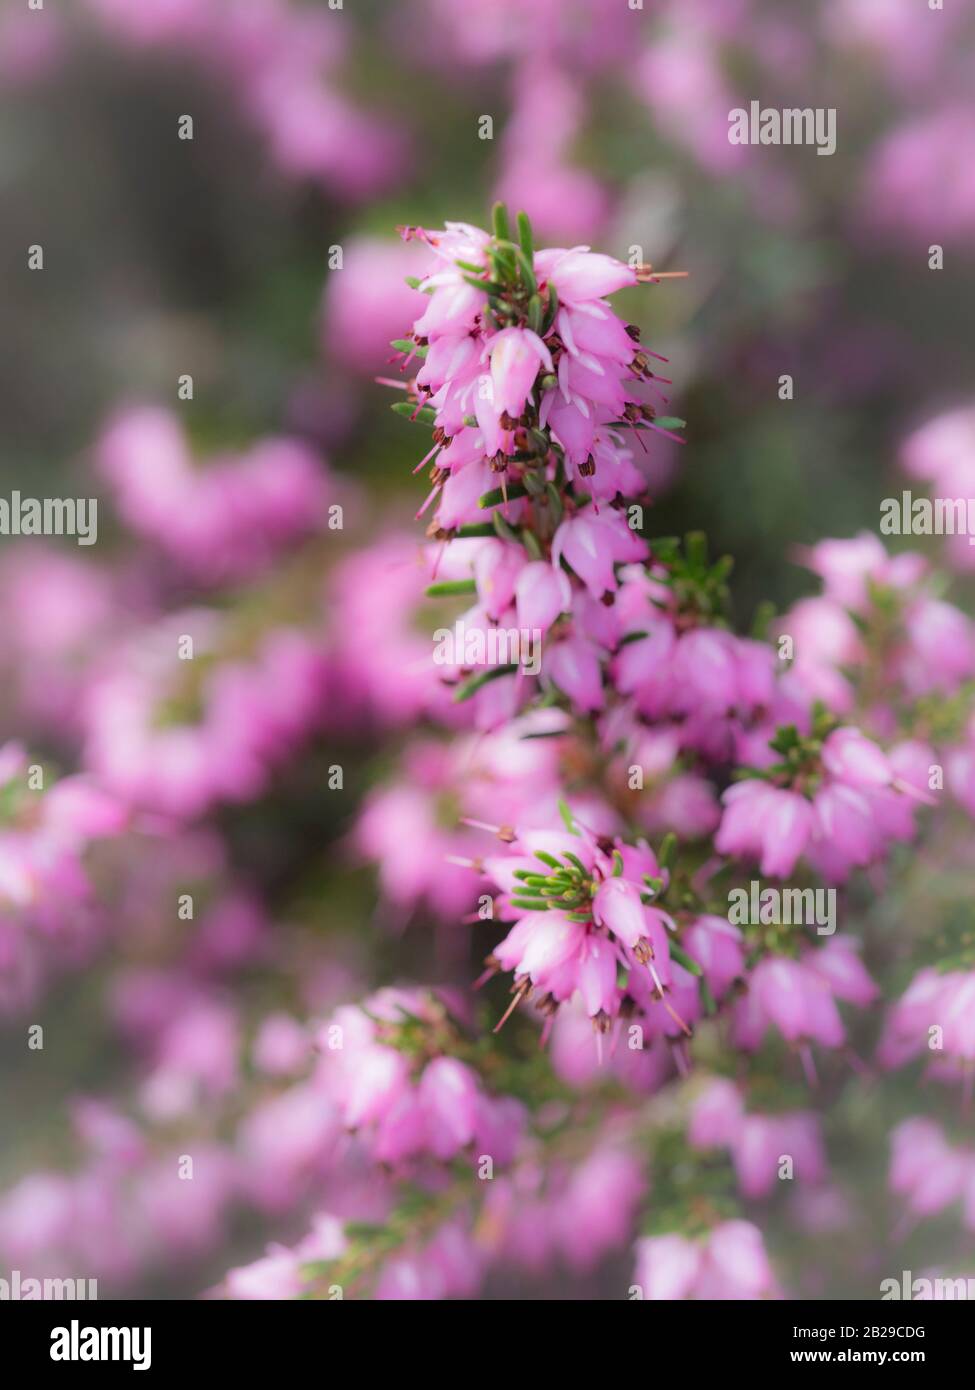 Close up of pink flowers on heather Erica × darleyensis - soft focus effect Stock Photo